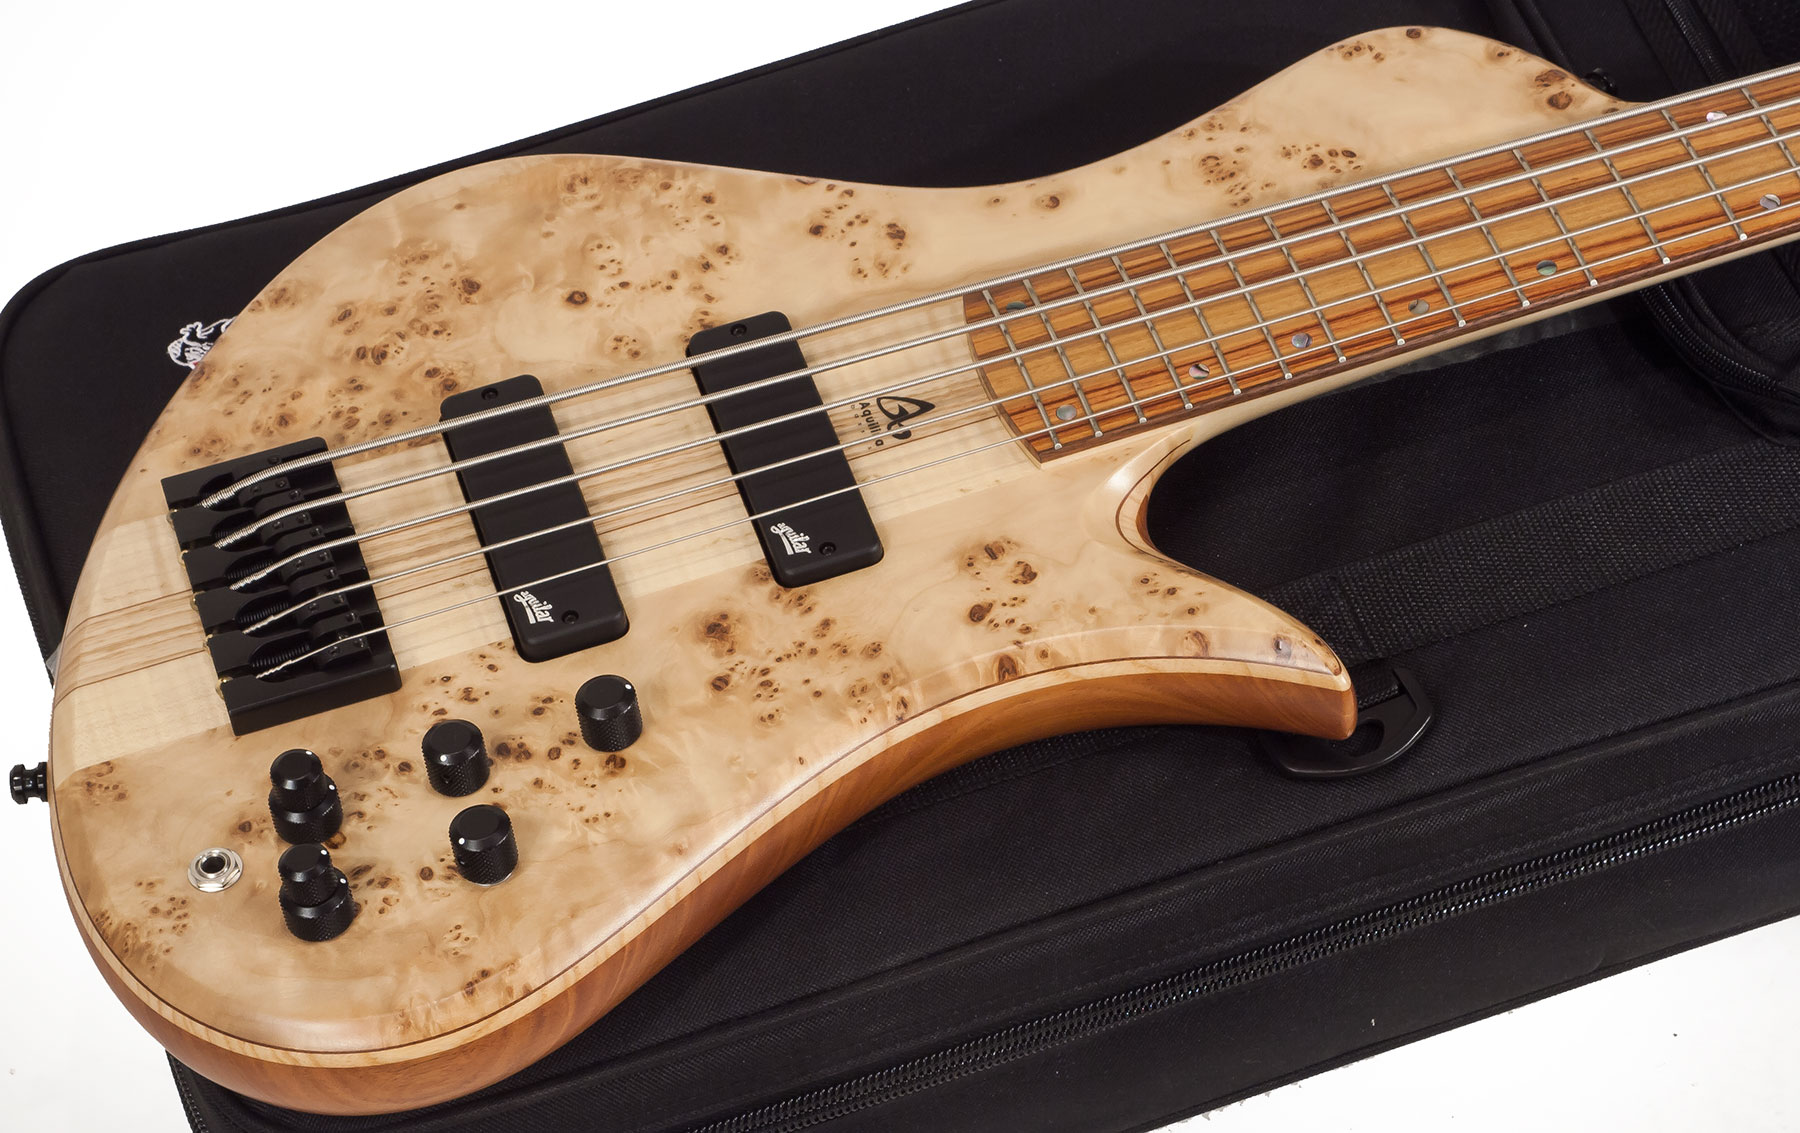 Aquilina Shelby Chambre Acoustique 5 Aulne/acajou Active J.east Rw #011855 - Natural - Solid body electric bass - Variation 1